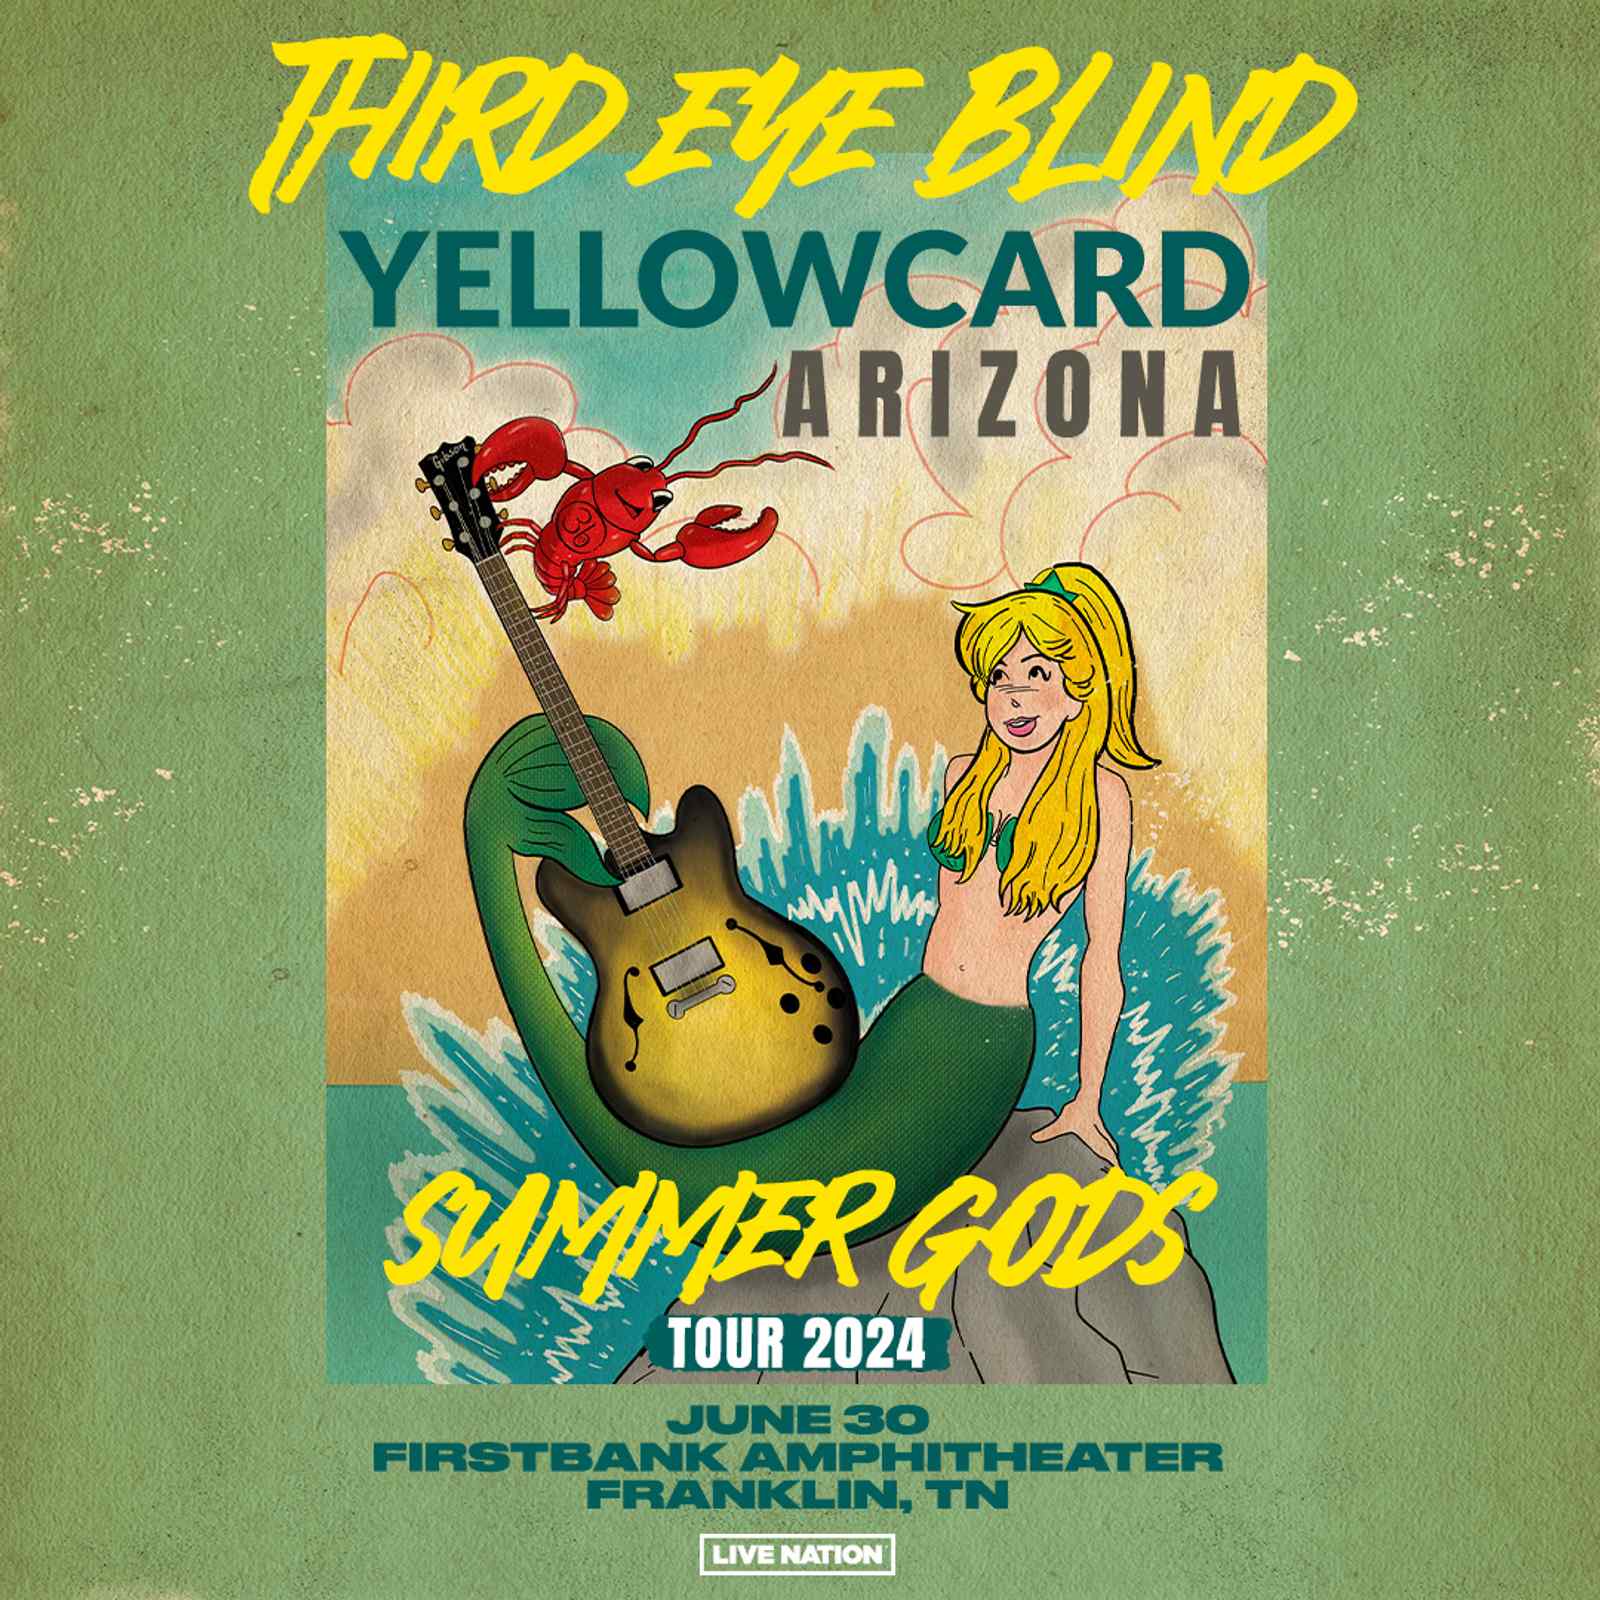 Third Eye Blind Summer Gods Tour 2024 with special guests Yellowcard & A R I Z O N A - 6:30 PM